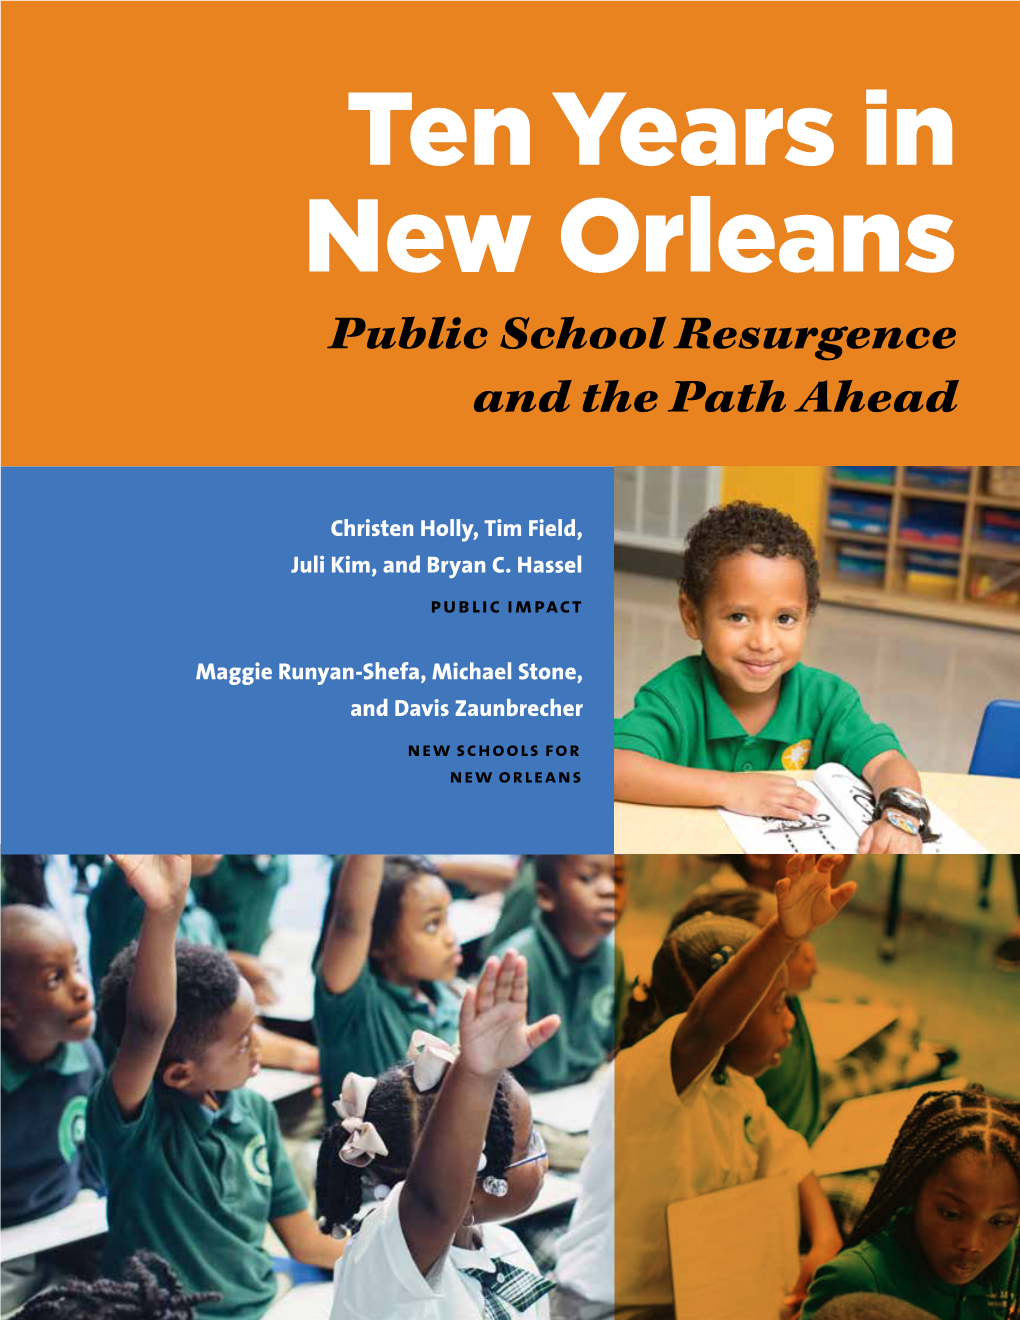 Ten Years in New Orleans: Public School Resurgence and the Path